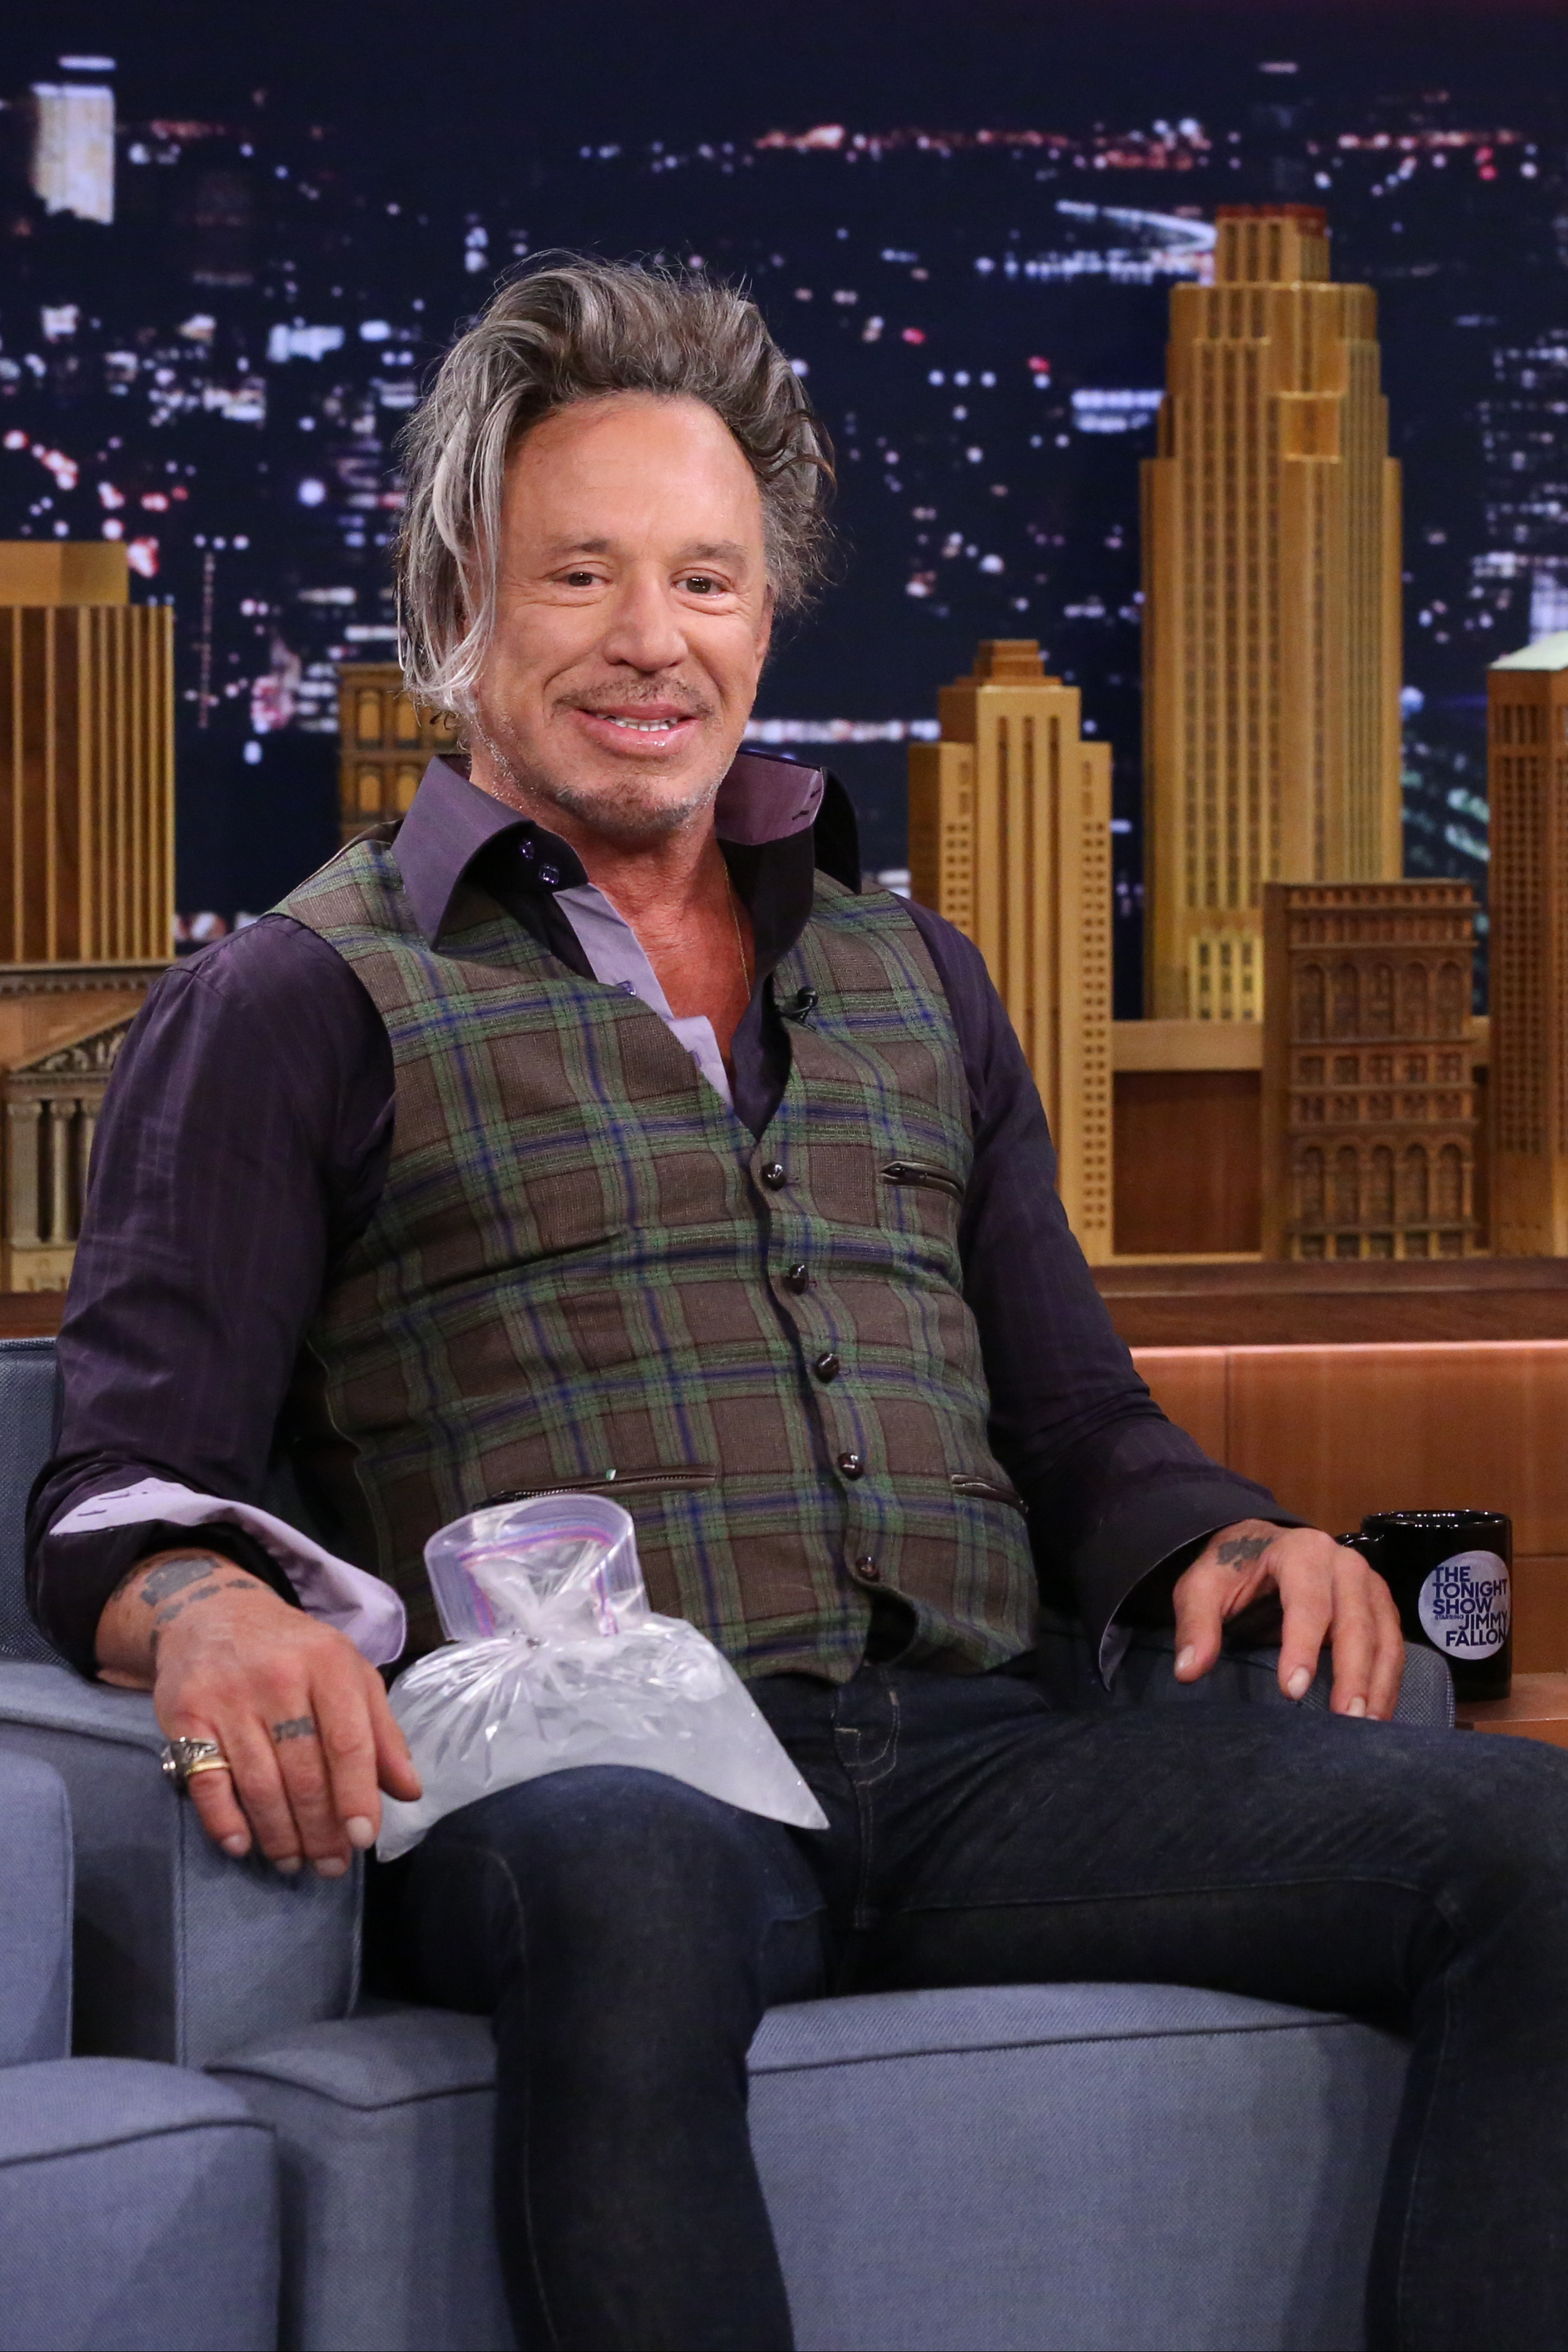 Mickey Rourke during an interview on "The Tonight Show Starring Jimmy Fallon" on August 12, 2014 | Source: Getty Images